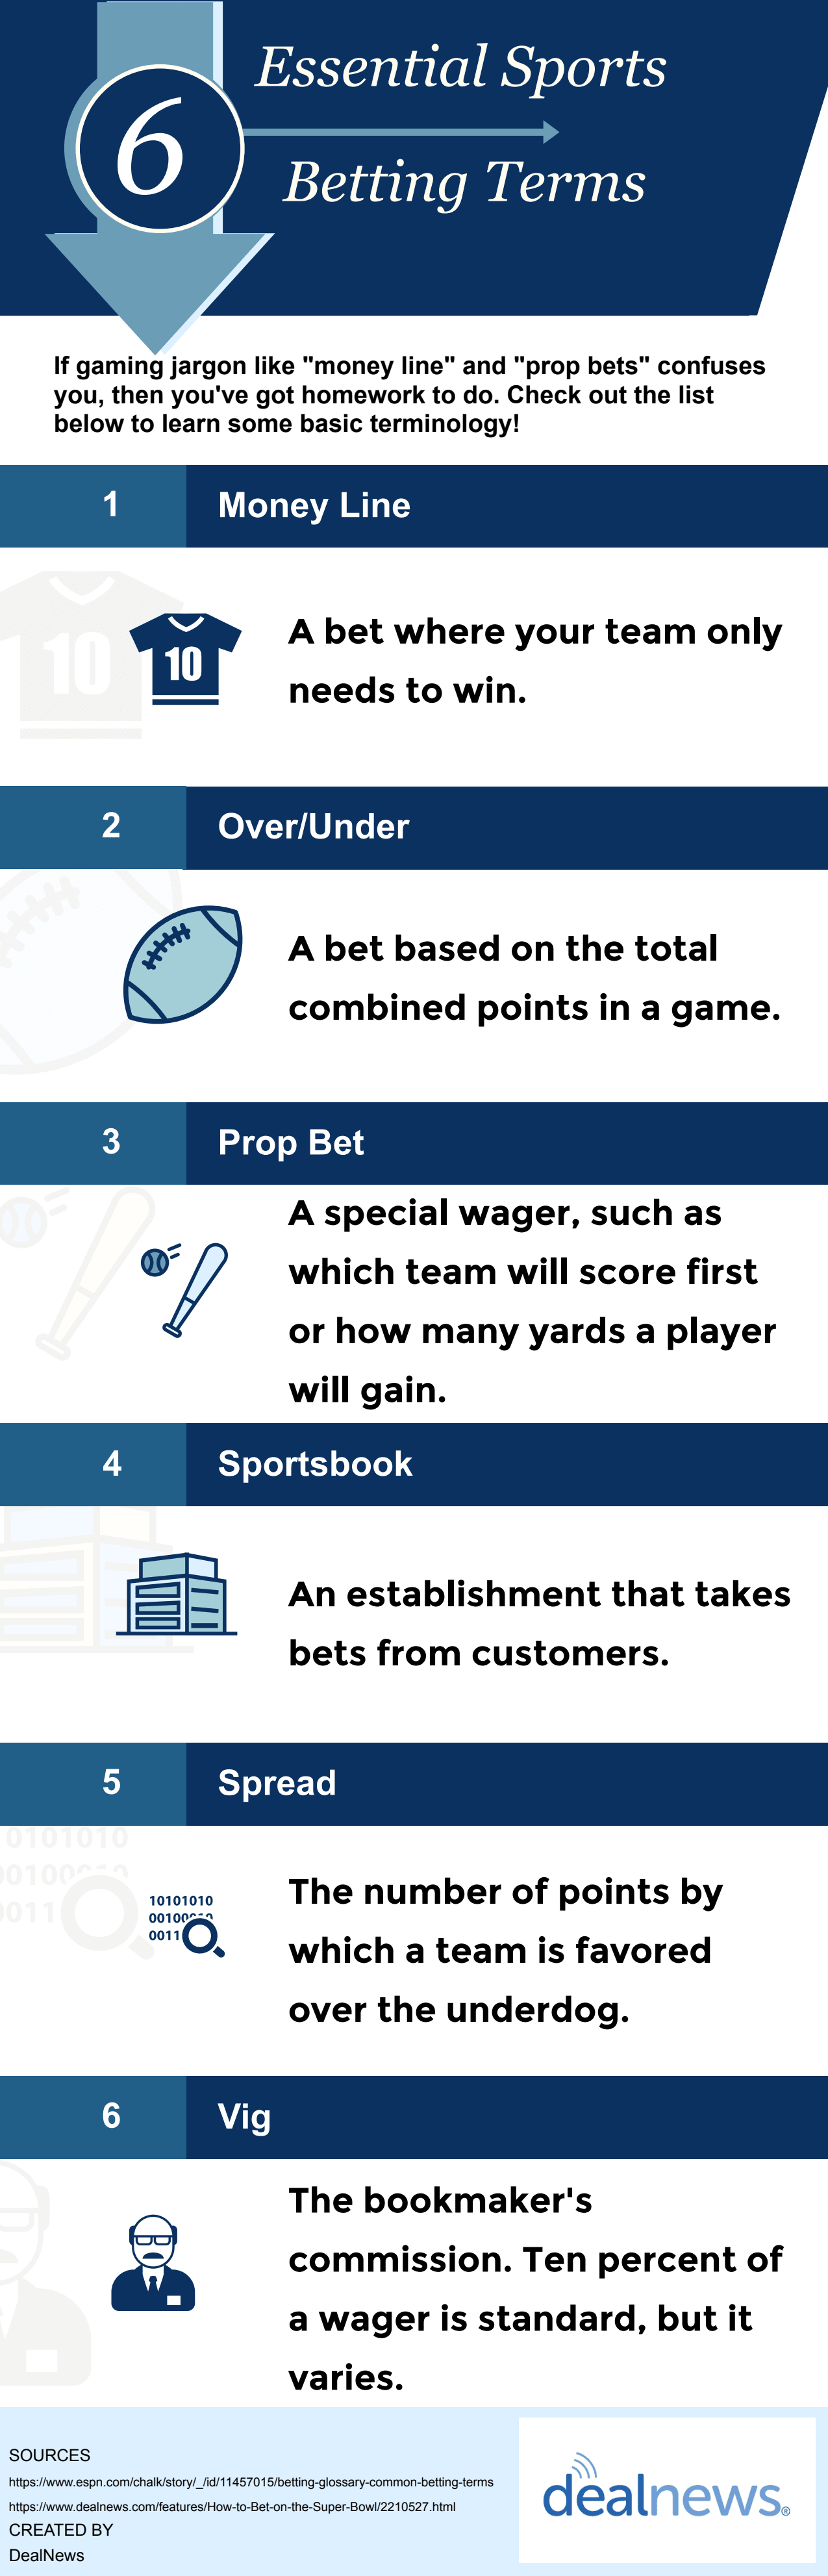 Sports Betting infographic